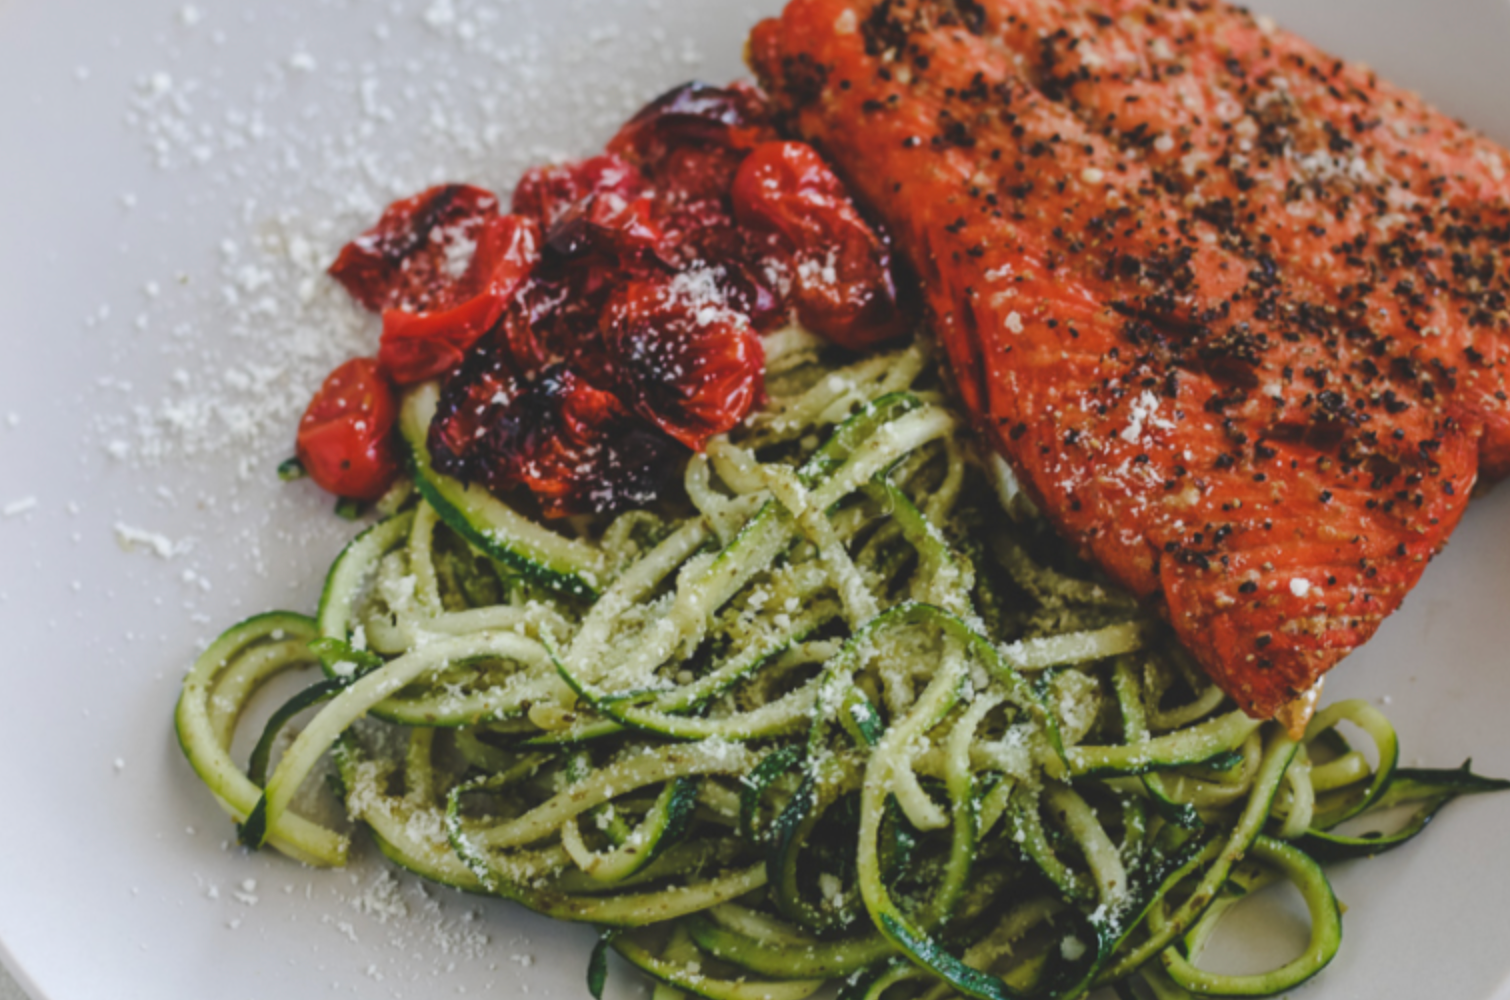 Broiled Salmon with Pesto Zucchini Noodles